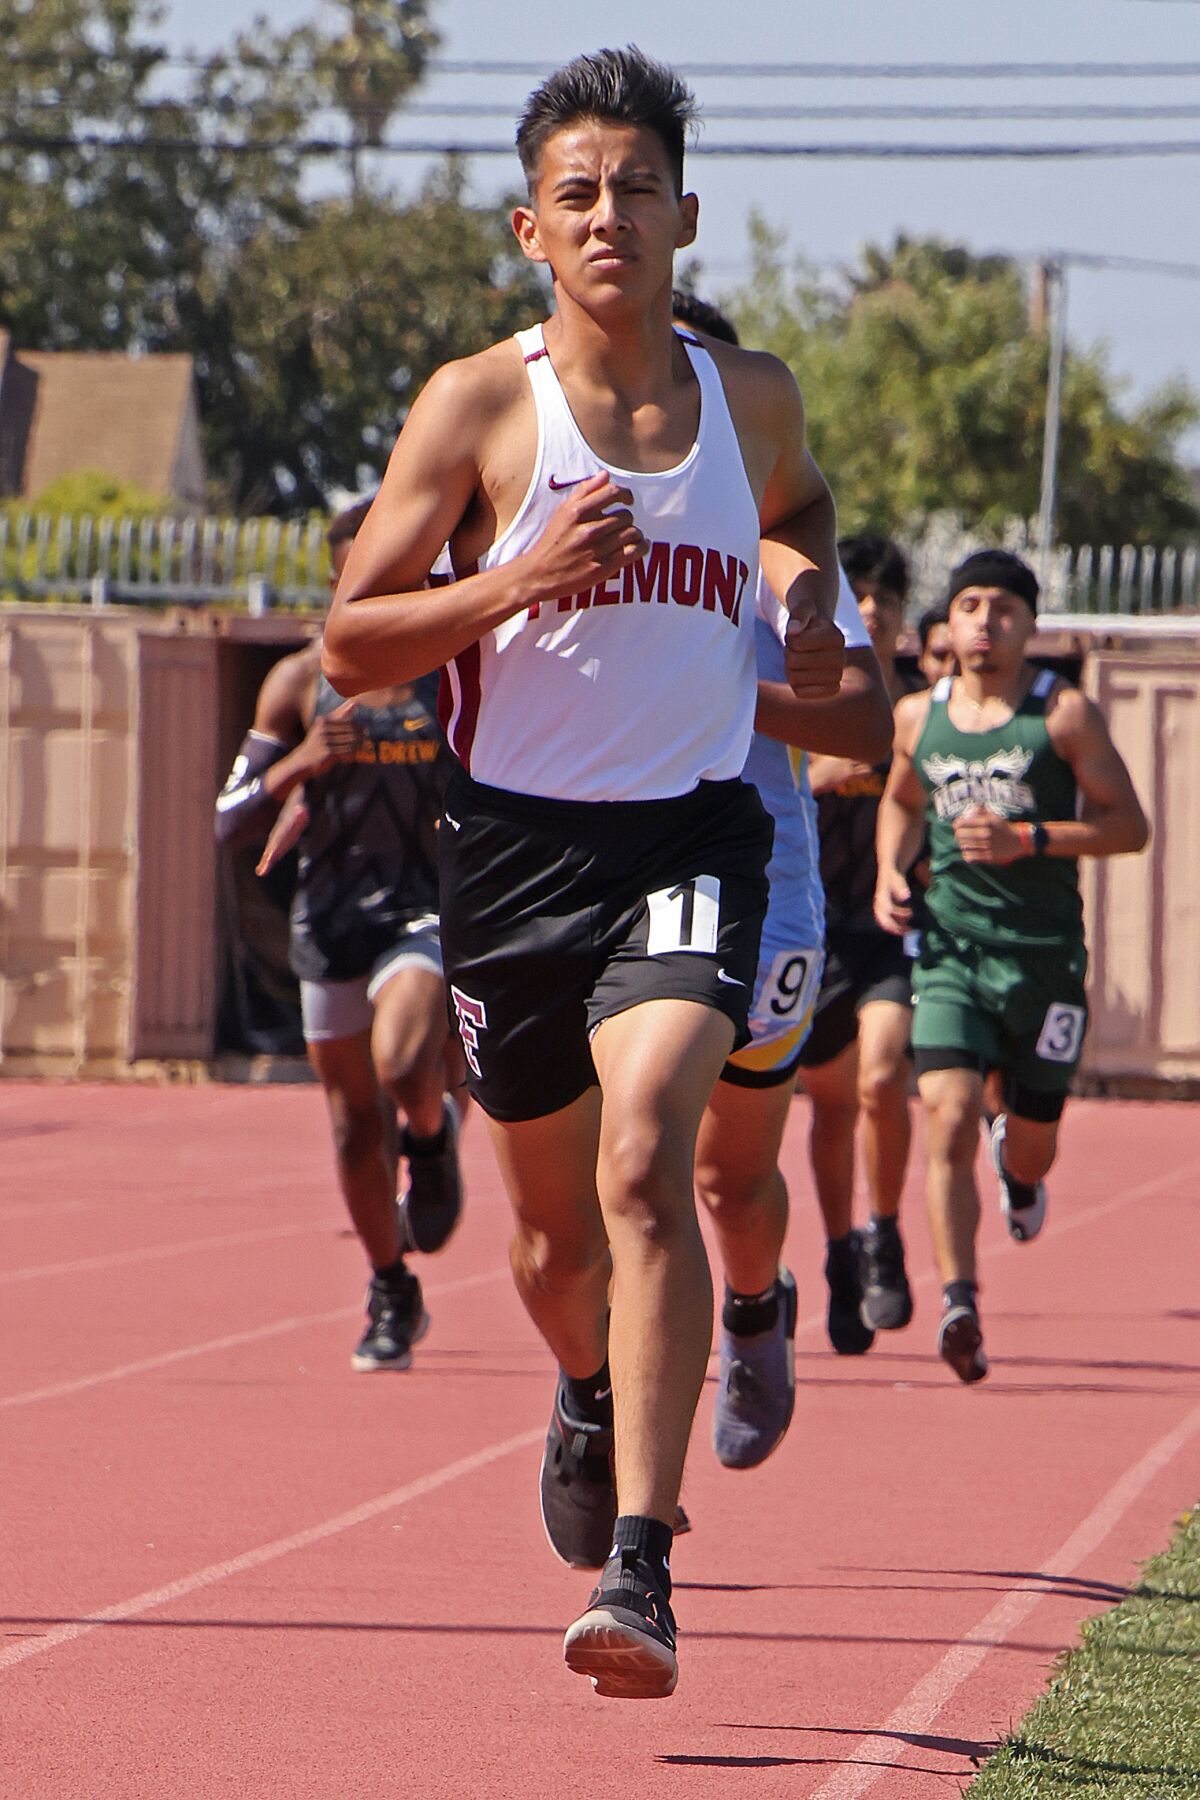 Edgar Vazquez of Fremont High runs in a race ahead of other competitors.